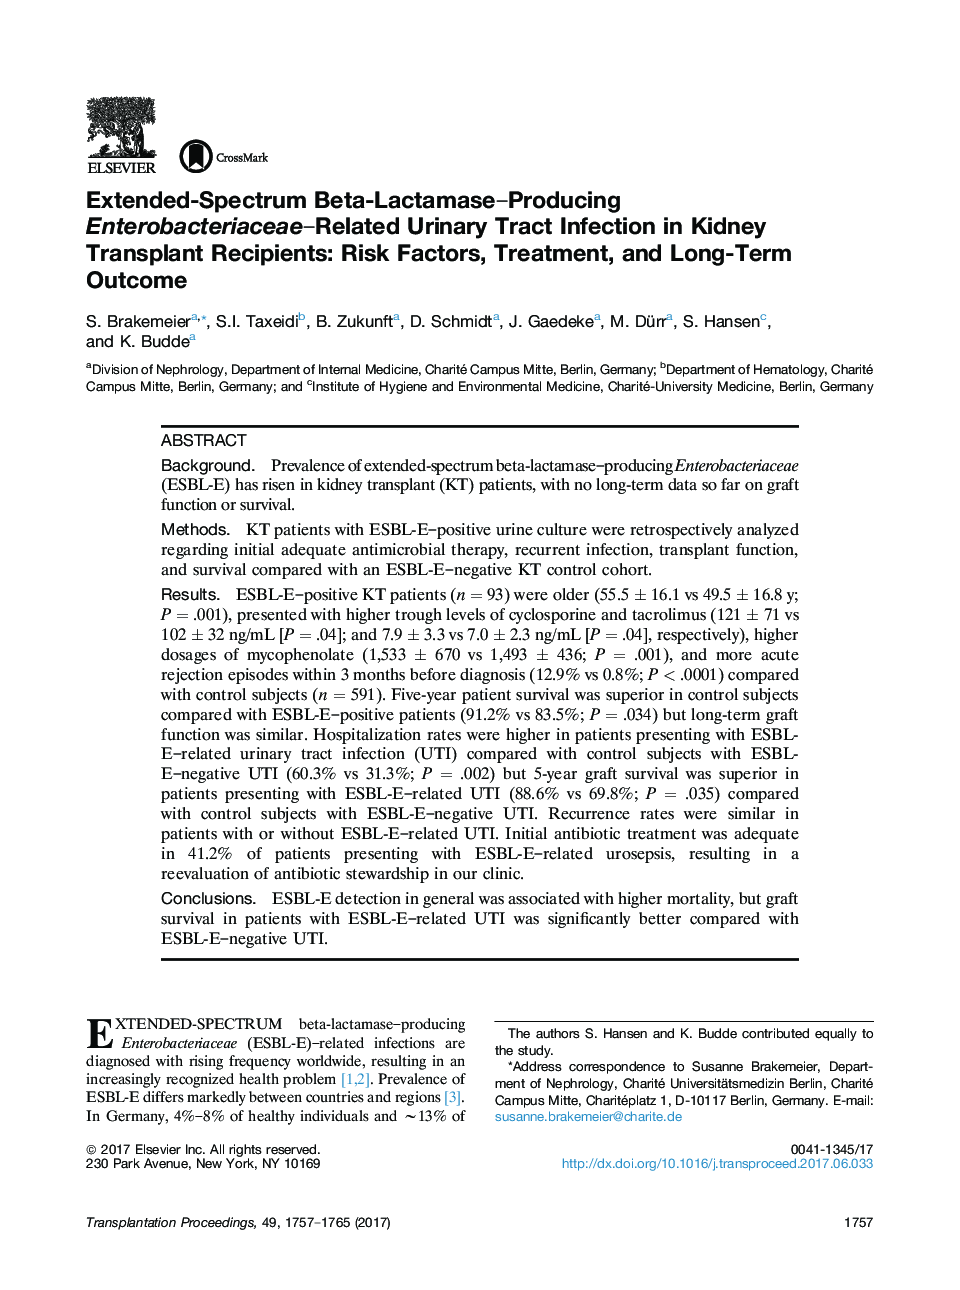 New Approaches in TransplantationKidney transplantationExtended-Spectrum Beta-Lactamase-Producing Enterobacteriaceae-Related Urinary Tract Infection in Kidney Transplant Recipients: Risk Factors, Treatment, and Long-Term Outcome